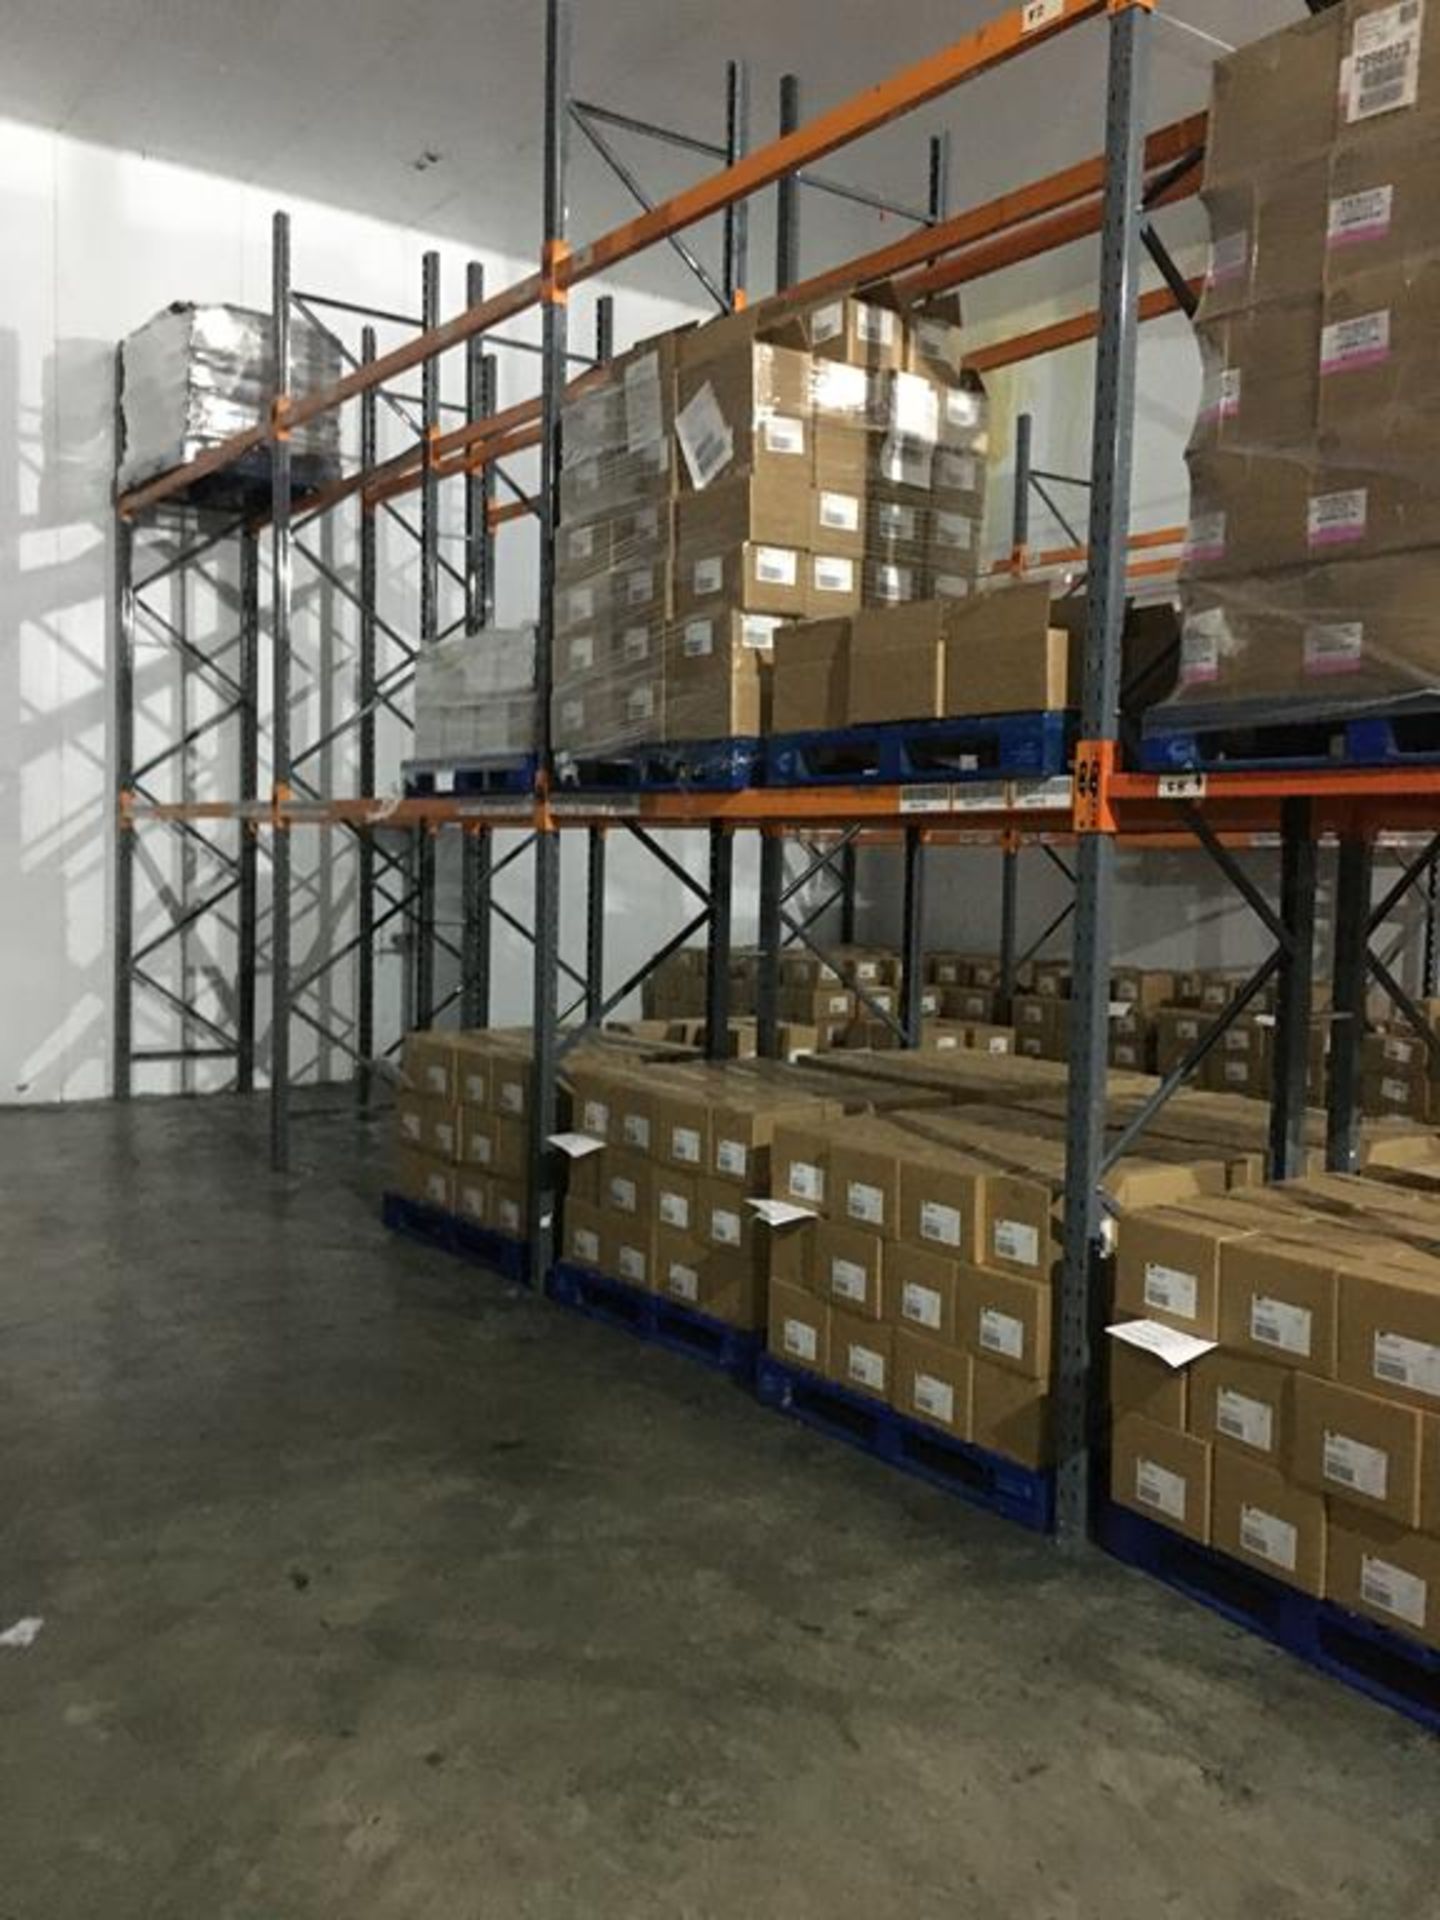 Dexion and Storax mixed bundle of racking in cold store